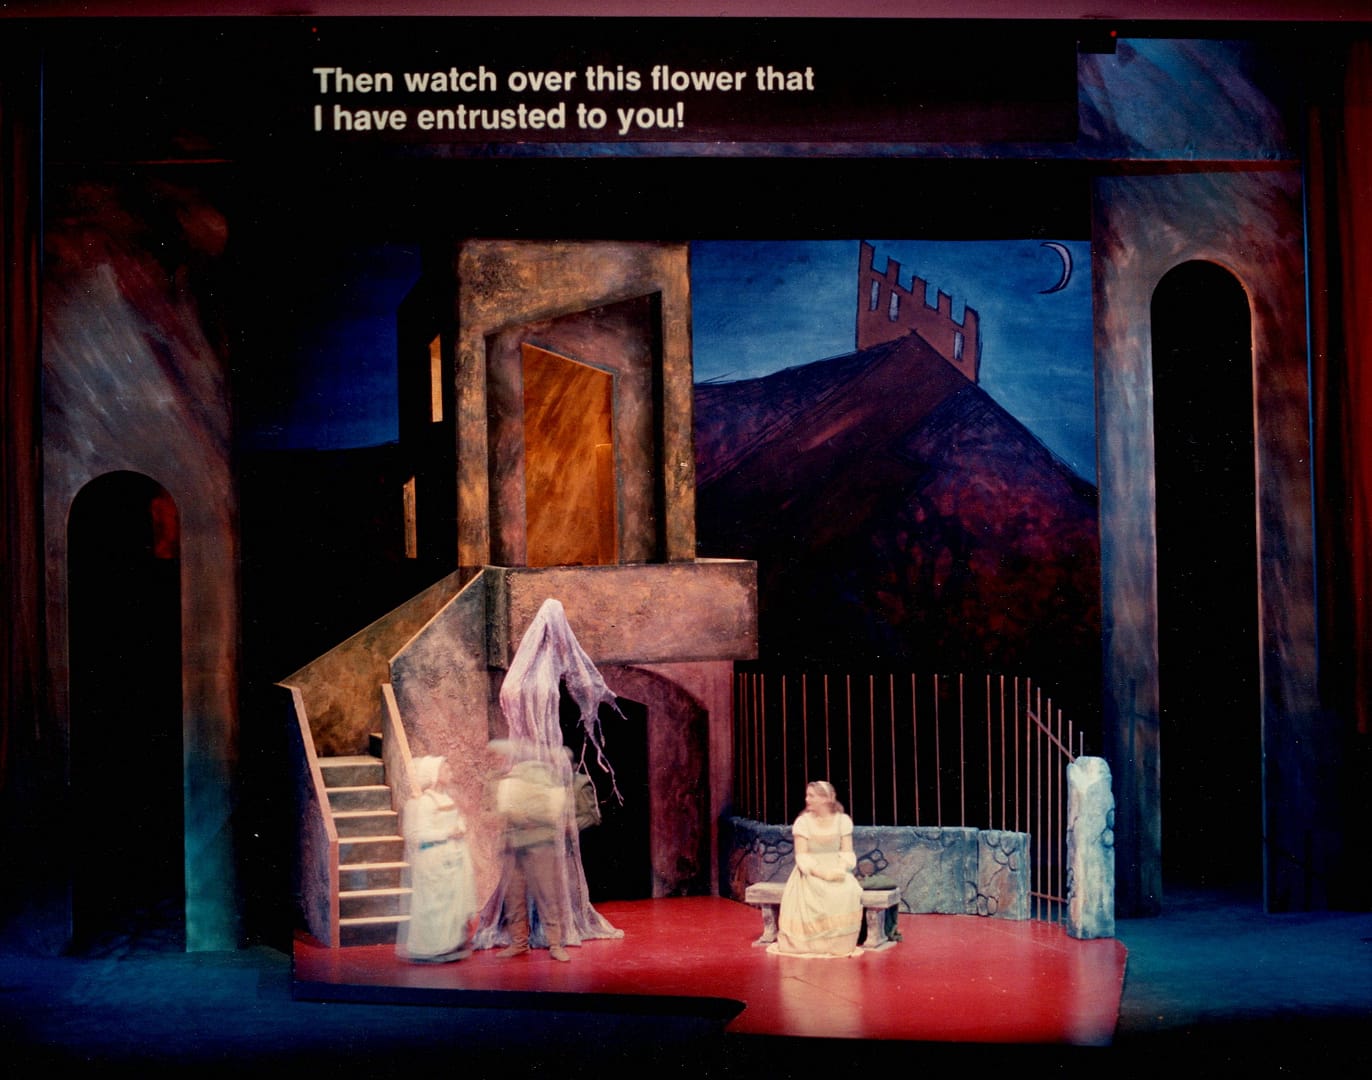 Set Act 1 Scene 2 - Rigoletto by Guiseppe Verdi at the Illinois Opera Theater - Krannert Center for the Performing Arts at University of Illinois (Urbana/Champaign)